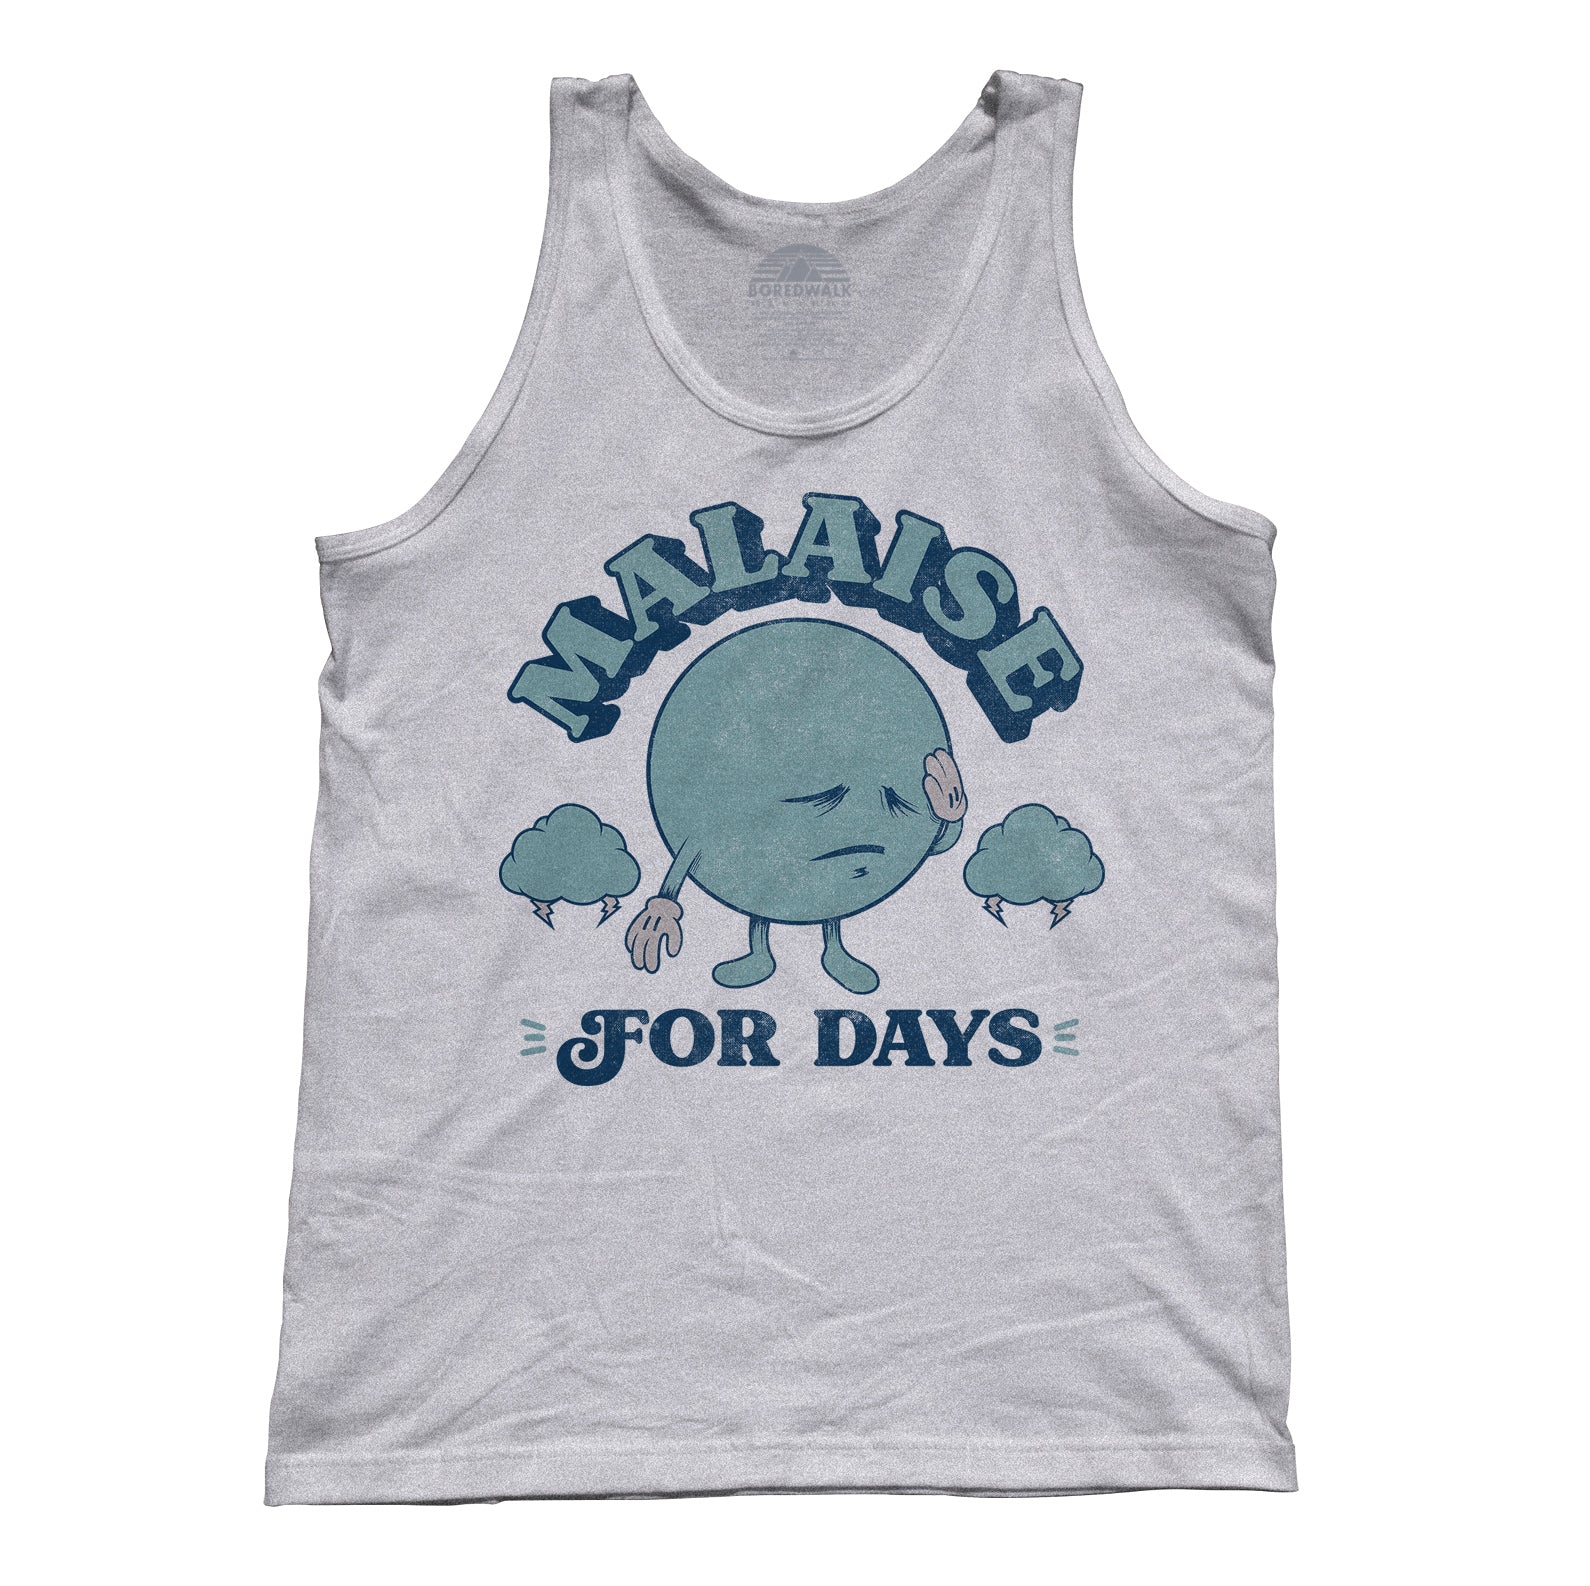 Unisex Malaise For Days Tank Top